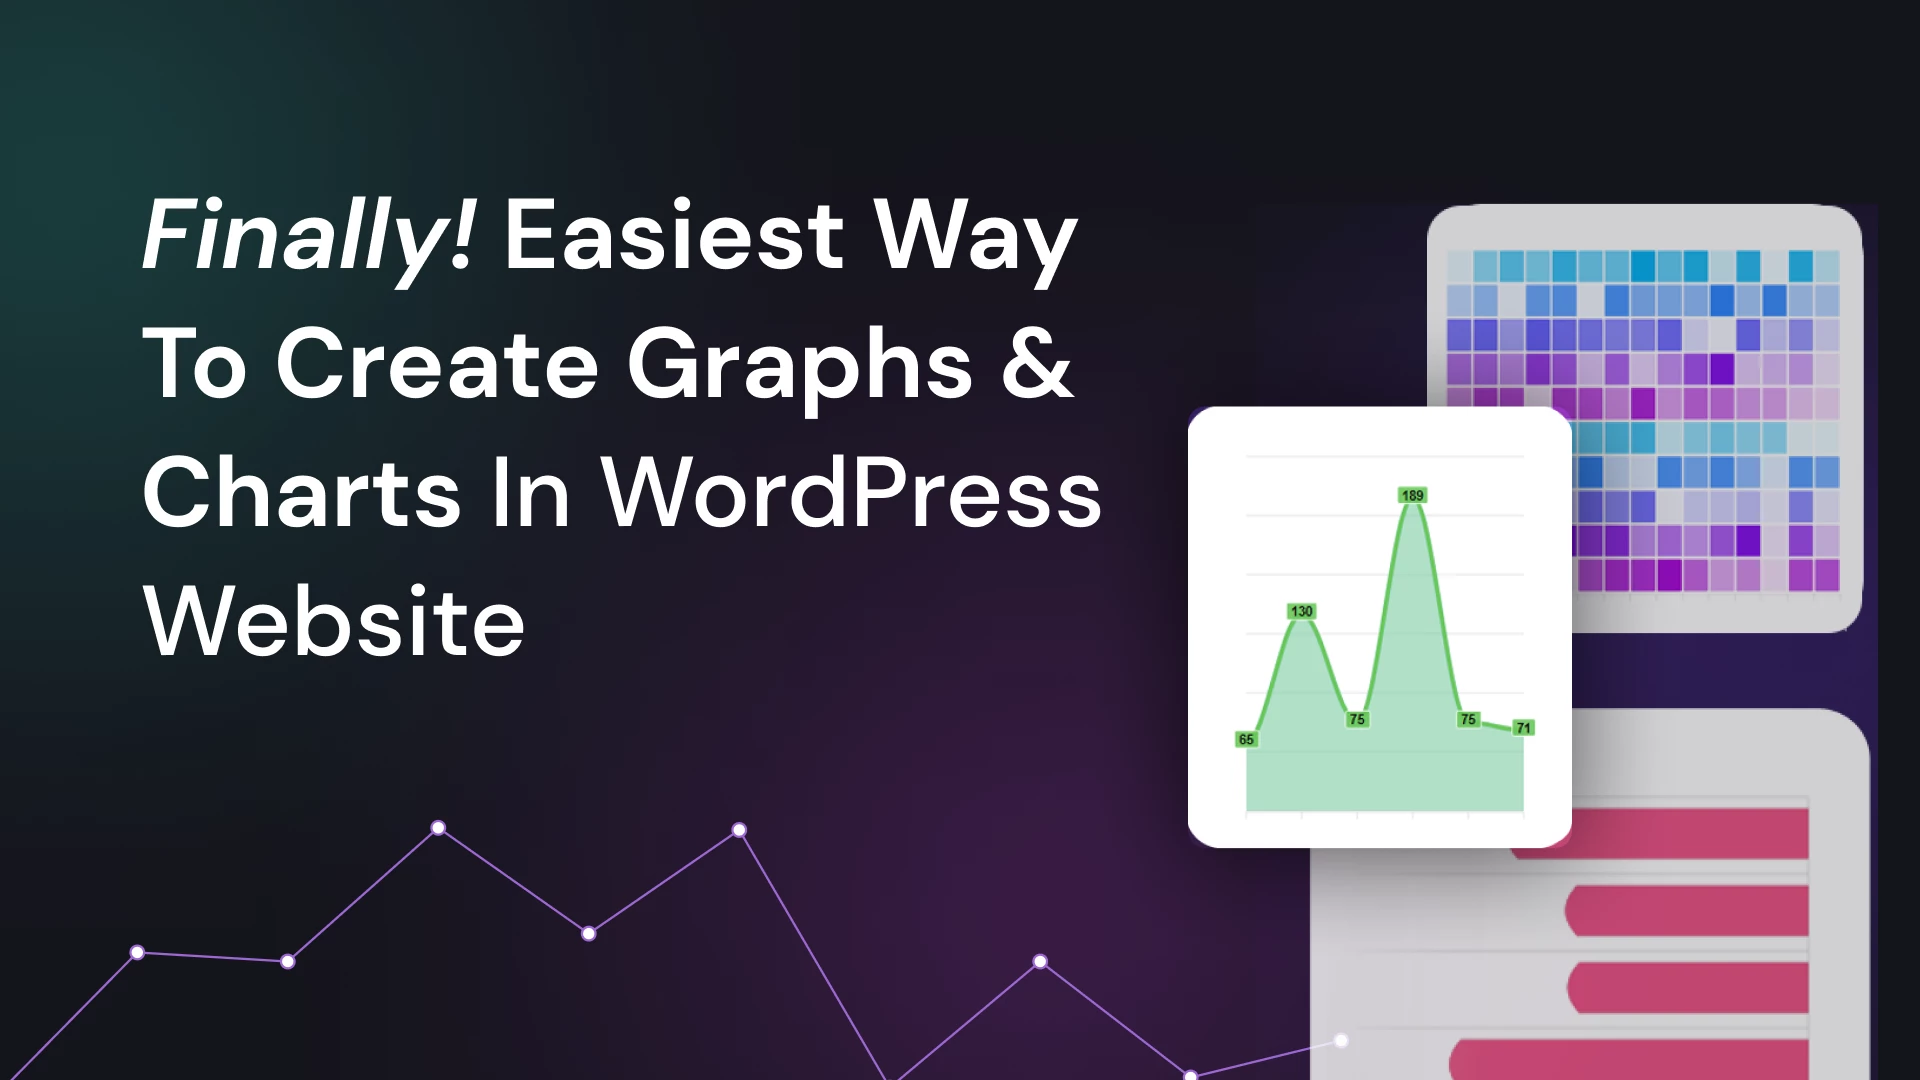 Finally! Easiest Way to Create Graphs and Charts in WordPress Website finally! easiest way to create graphs and charts in wordpress website Finally! Easiest Way to Create Graphs and Charts in WordPress Website 133894 Frame 54